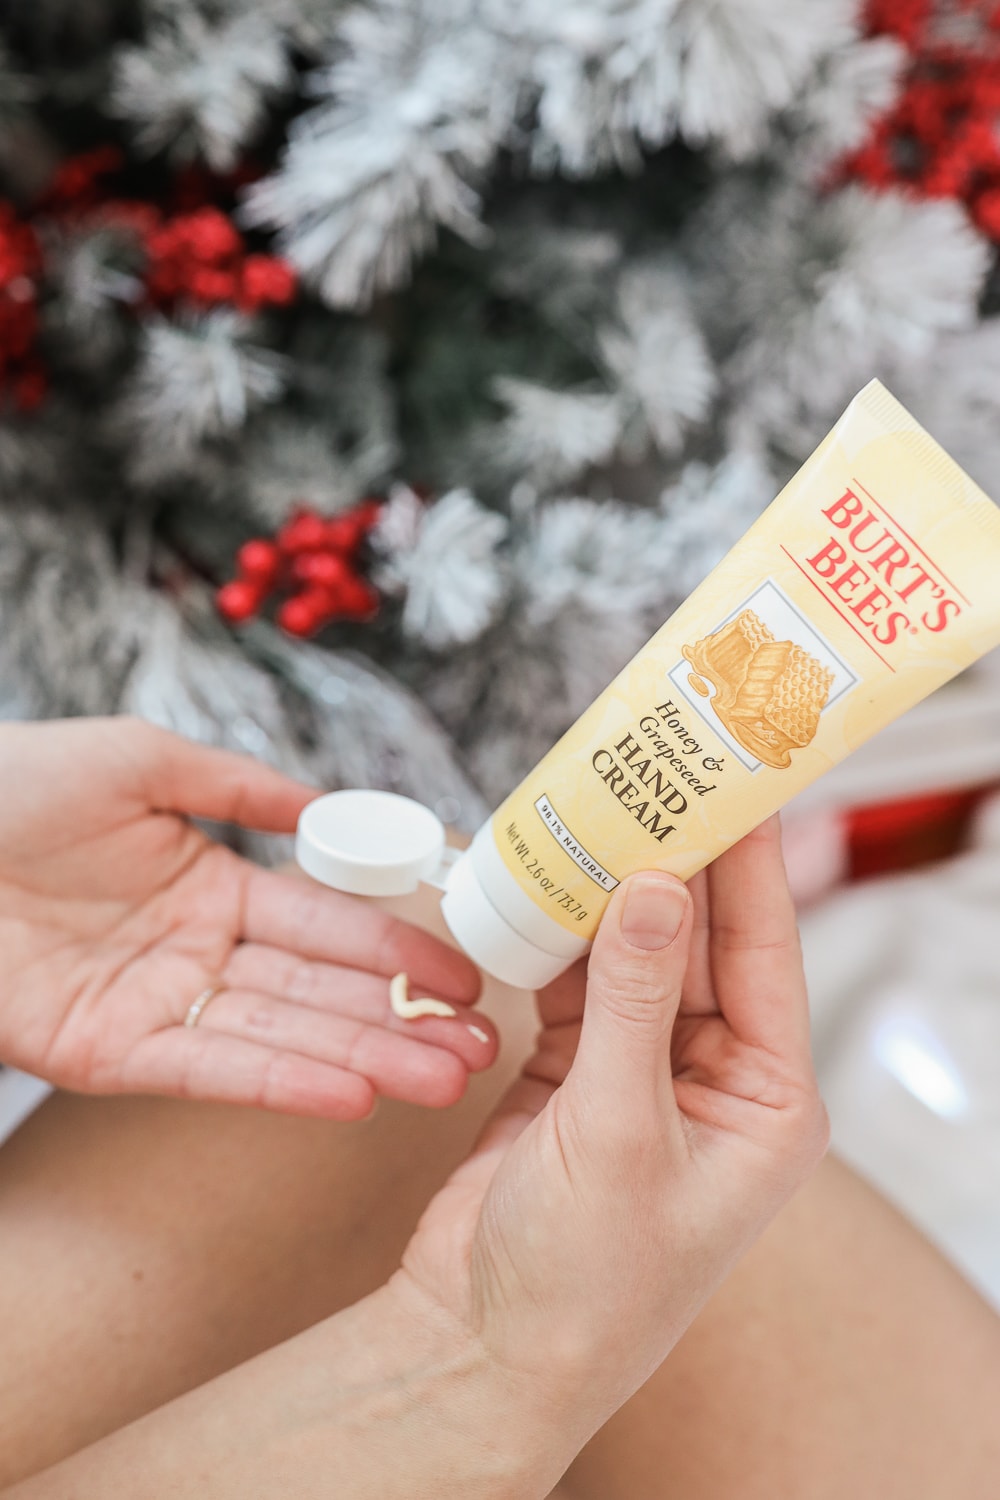 Blogger Stephanie Ziajka shares why Burt's Bees Honey and Grapeseed Oil Hand Cream is a great stocking stuffer for guys on Diary of a Debutante